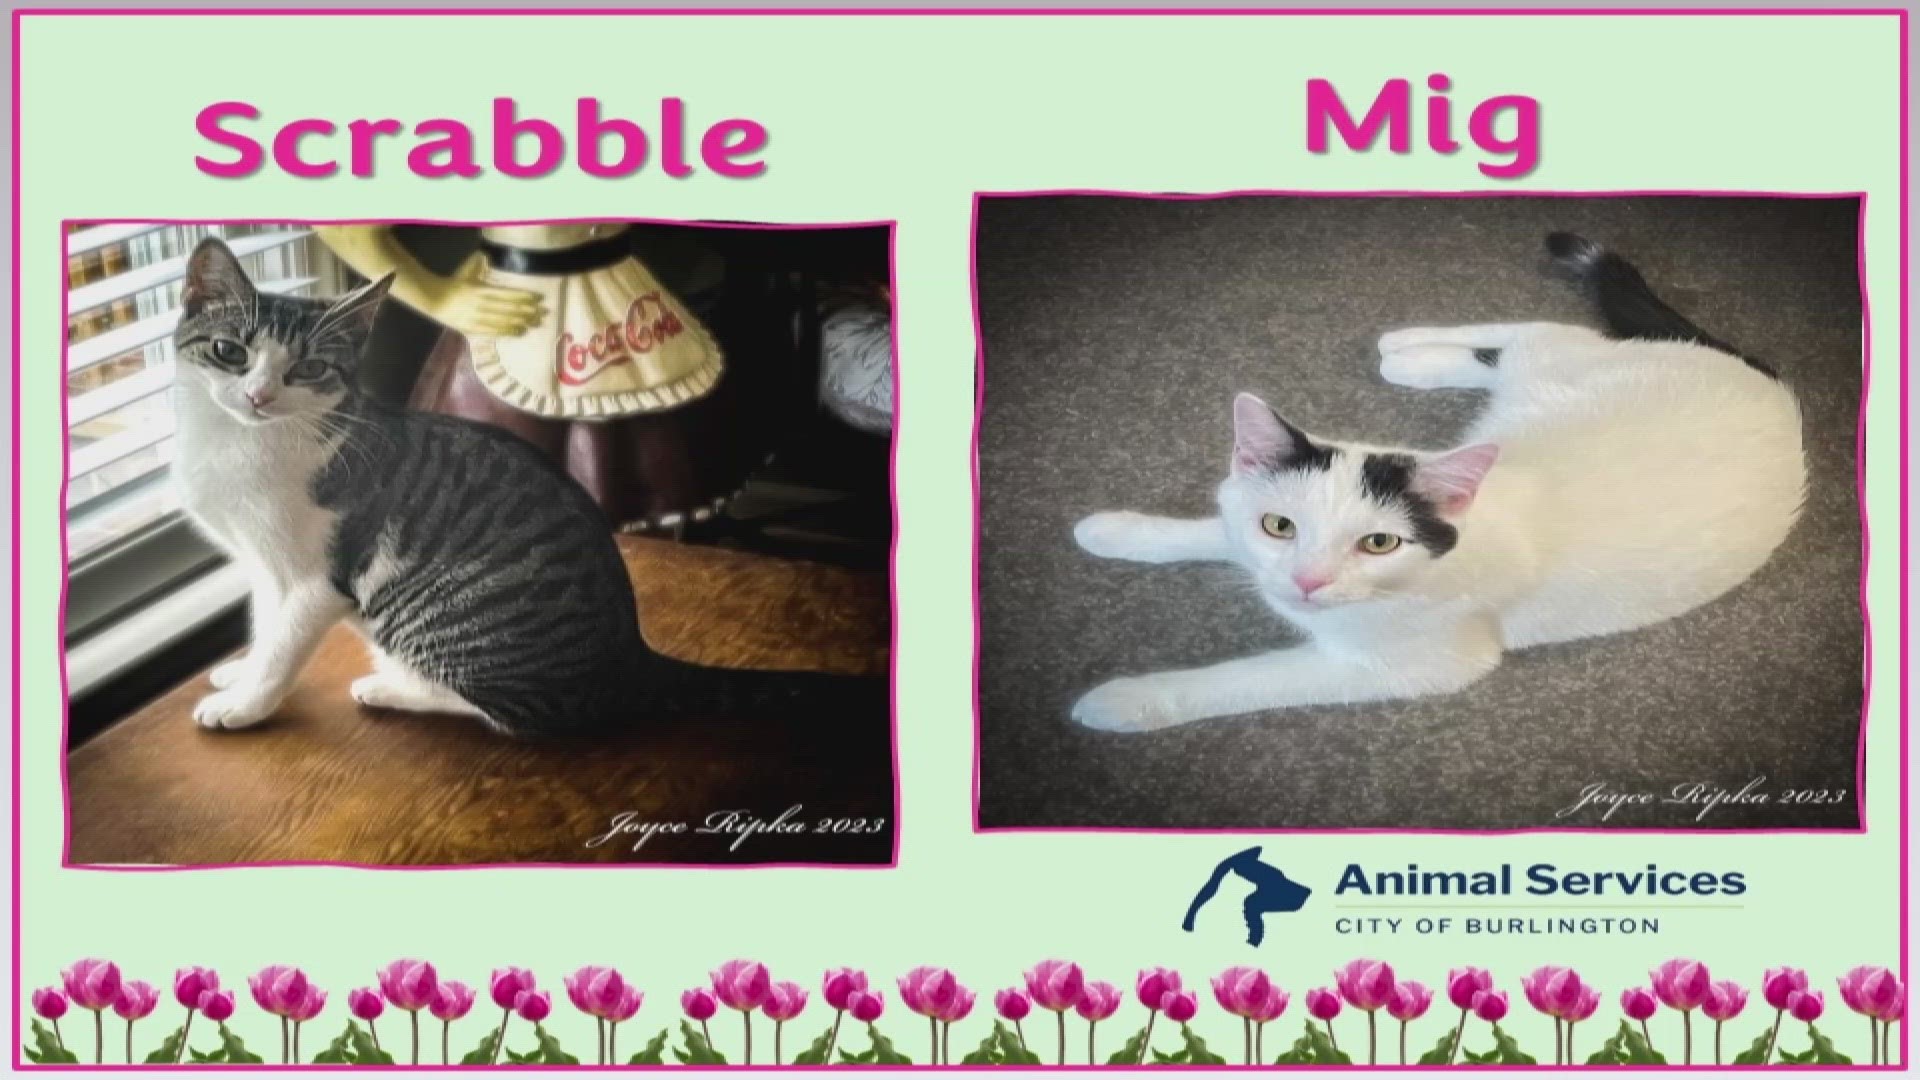 Let’s get Scrabble and Mig adopted!